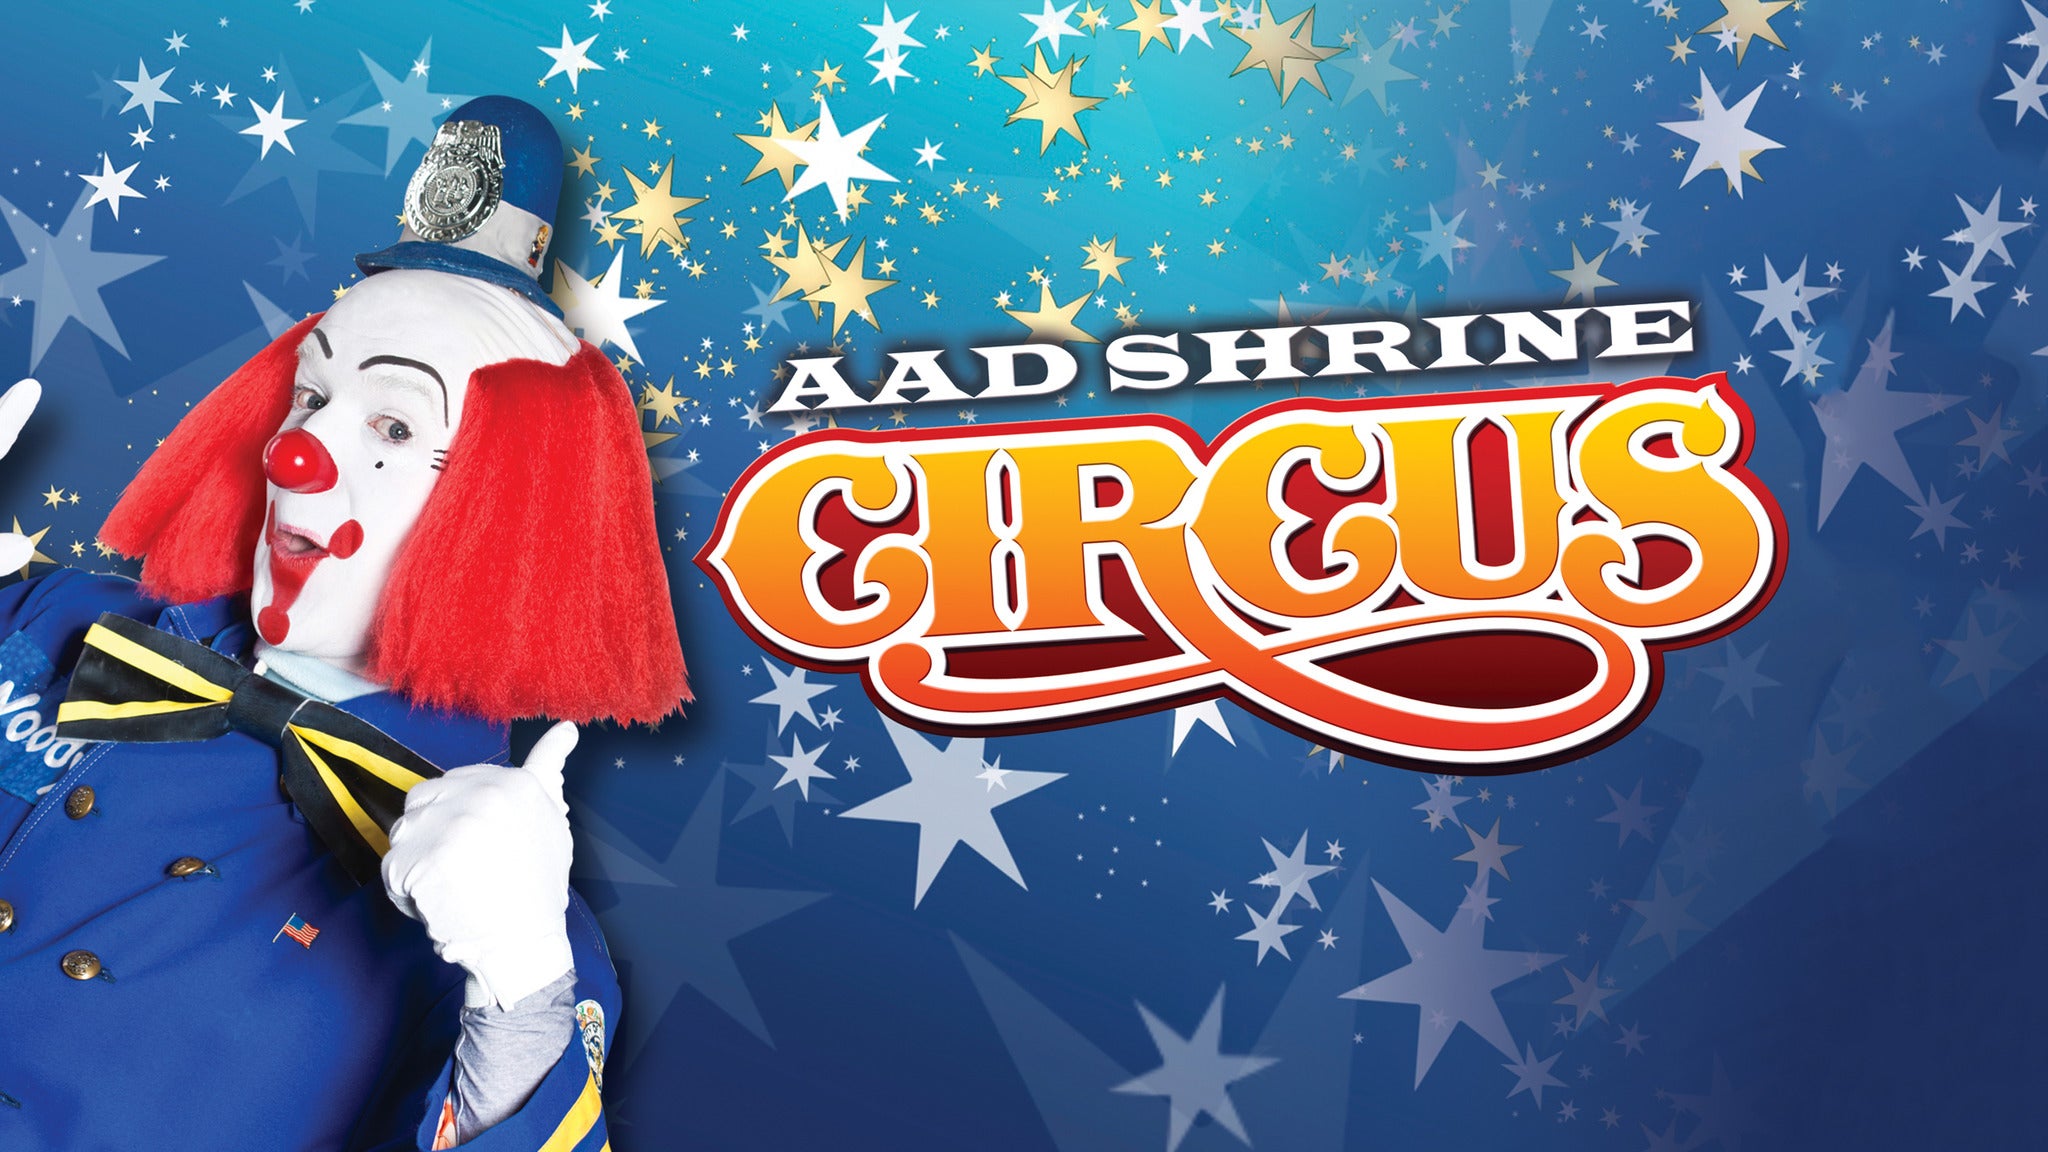 AAD Shrine Circus Tickets Event Dates & Schedule